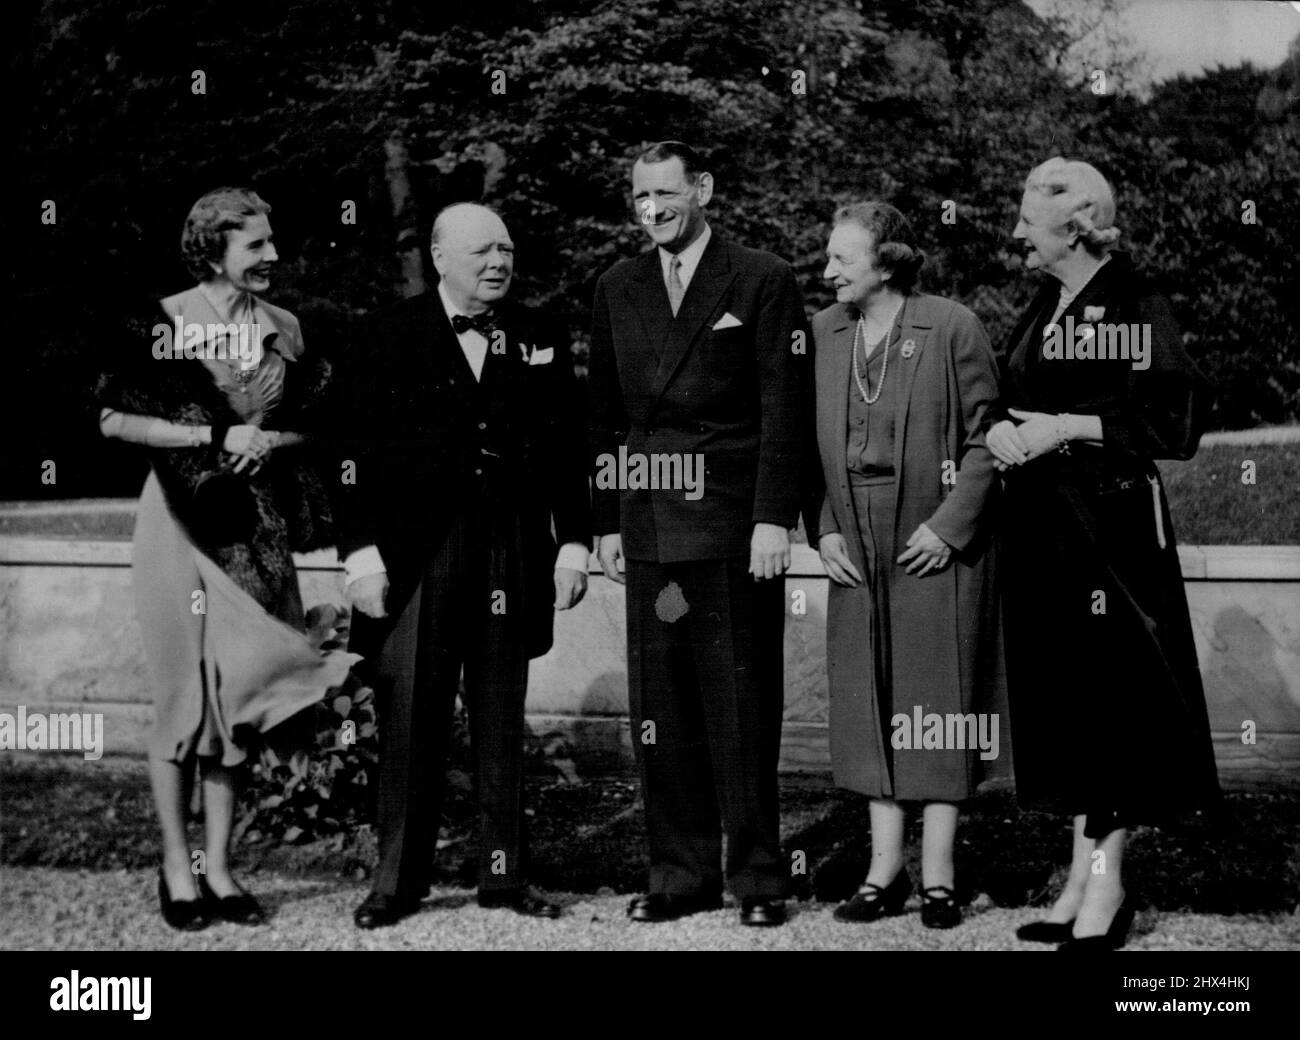 Churchill with King, Queen of Denmark - Left to Right, In the Garden of Fredensborg Castle, 30 miles from Copenhagen, are; Queen Ingrid, Mr. Winston Churchill, King Frederick, The Dowager Queen Alexandrine, and Mrs. Churchill, Oct 10. The Churchill's Guests of The Danish Resistance Movement, are staying at the Castle with the King and Queen of Denmark, during their Three-Day Visit. October 11, 1950. (Photo by Asociated Press Photo). Stock Photo